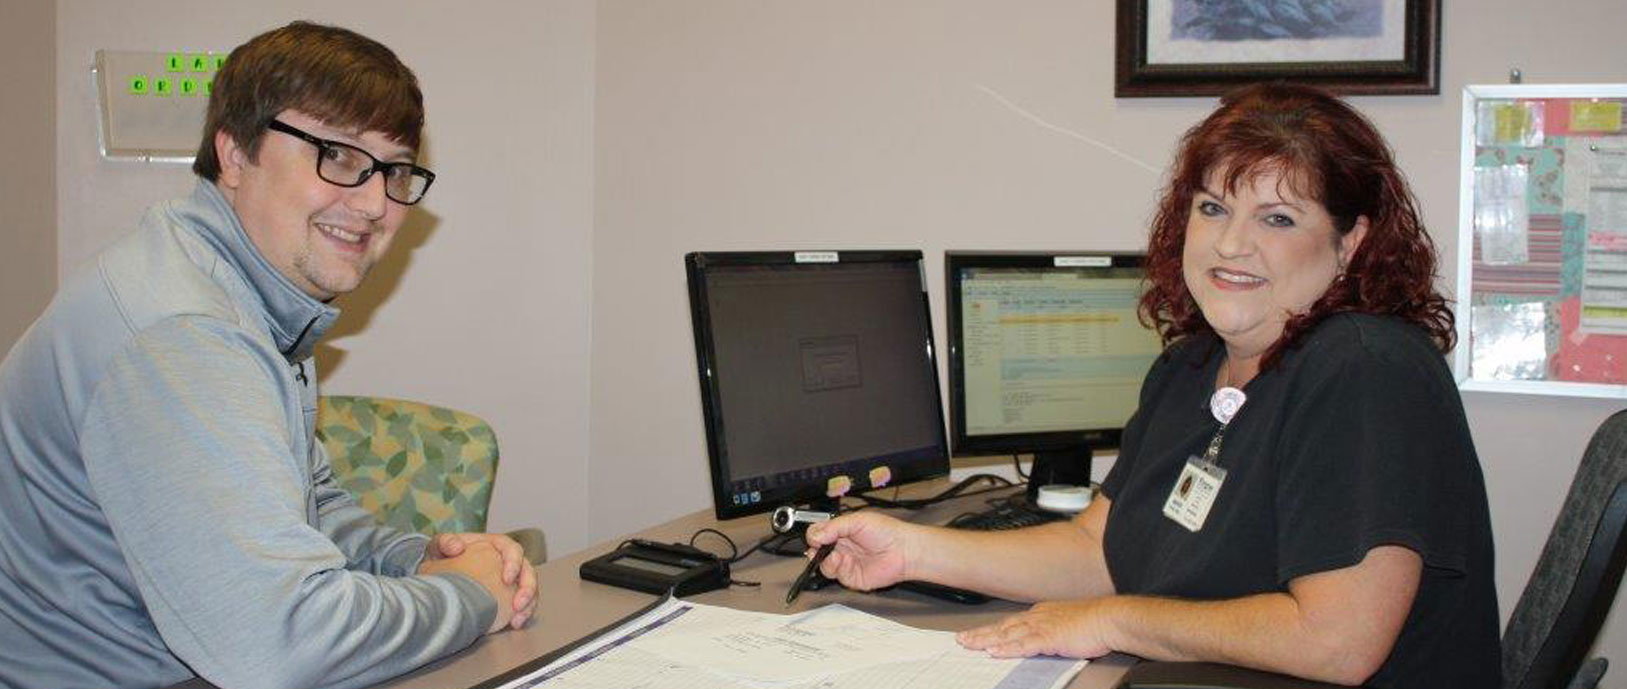 Banner picture of a female Medical Staff sitting down with a male patient at a desk in front of two computer monitors. She is holding a pen and pointing to some information on paperwork.